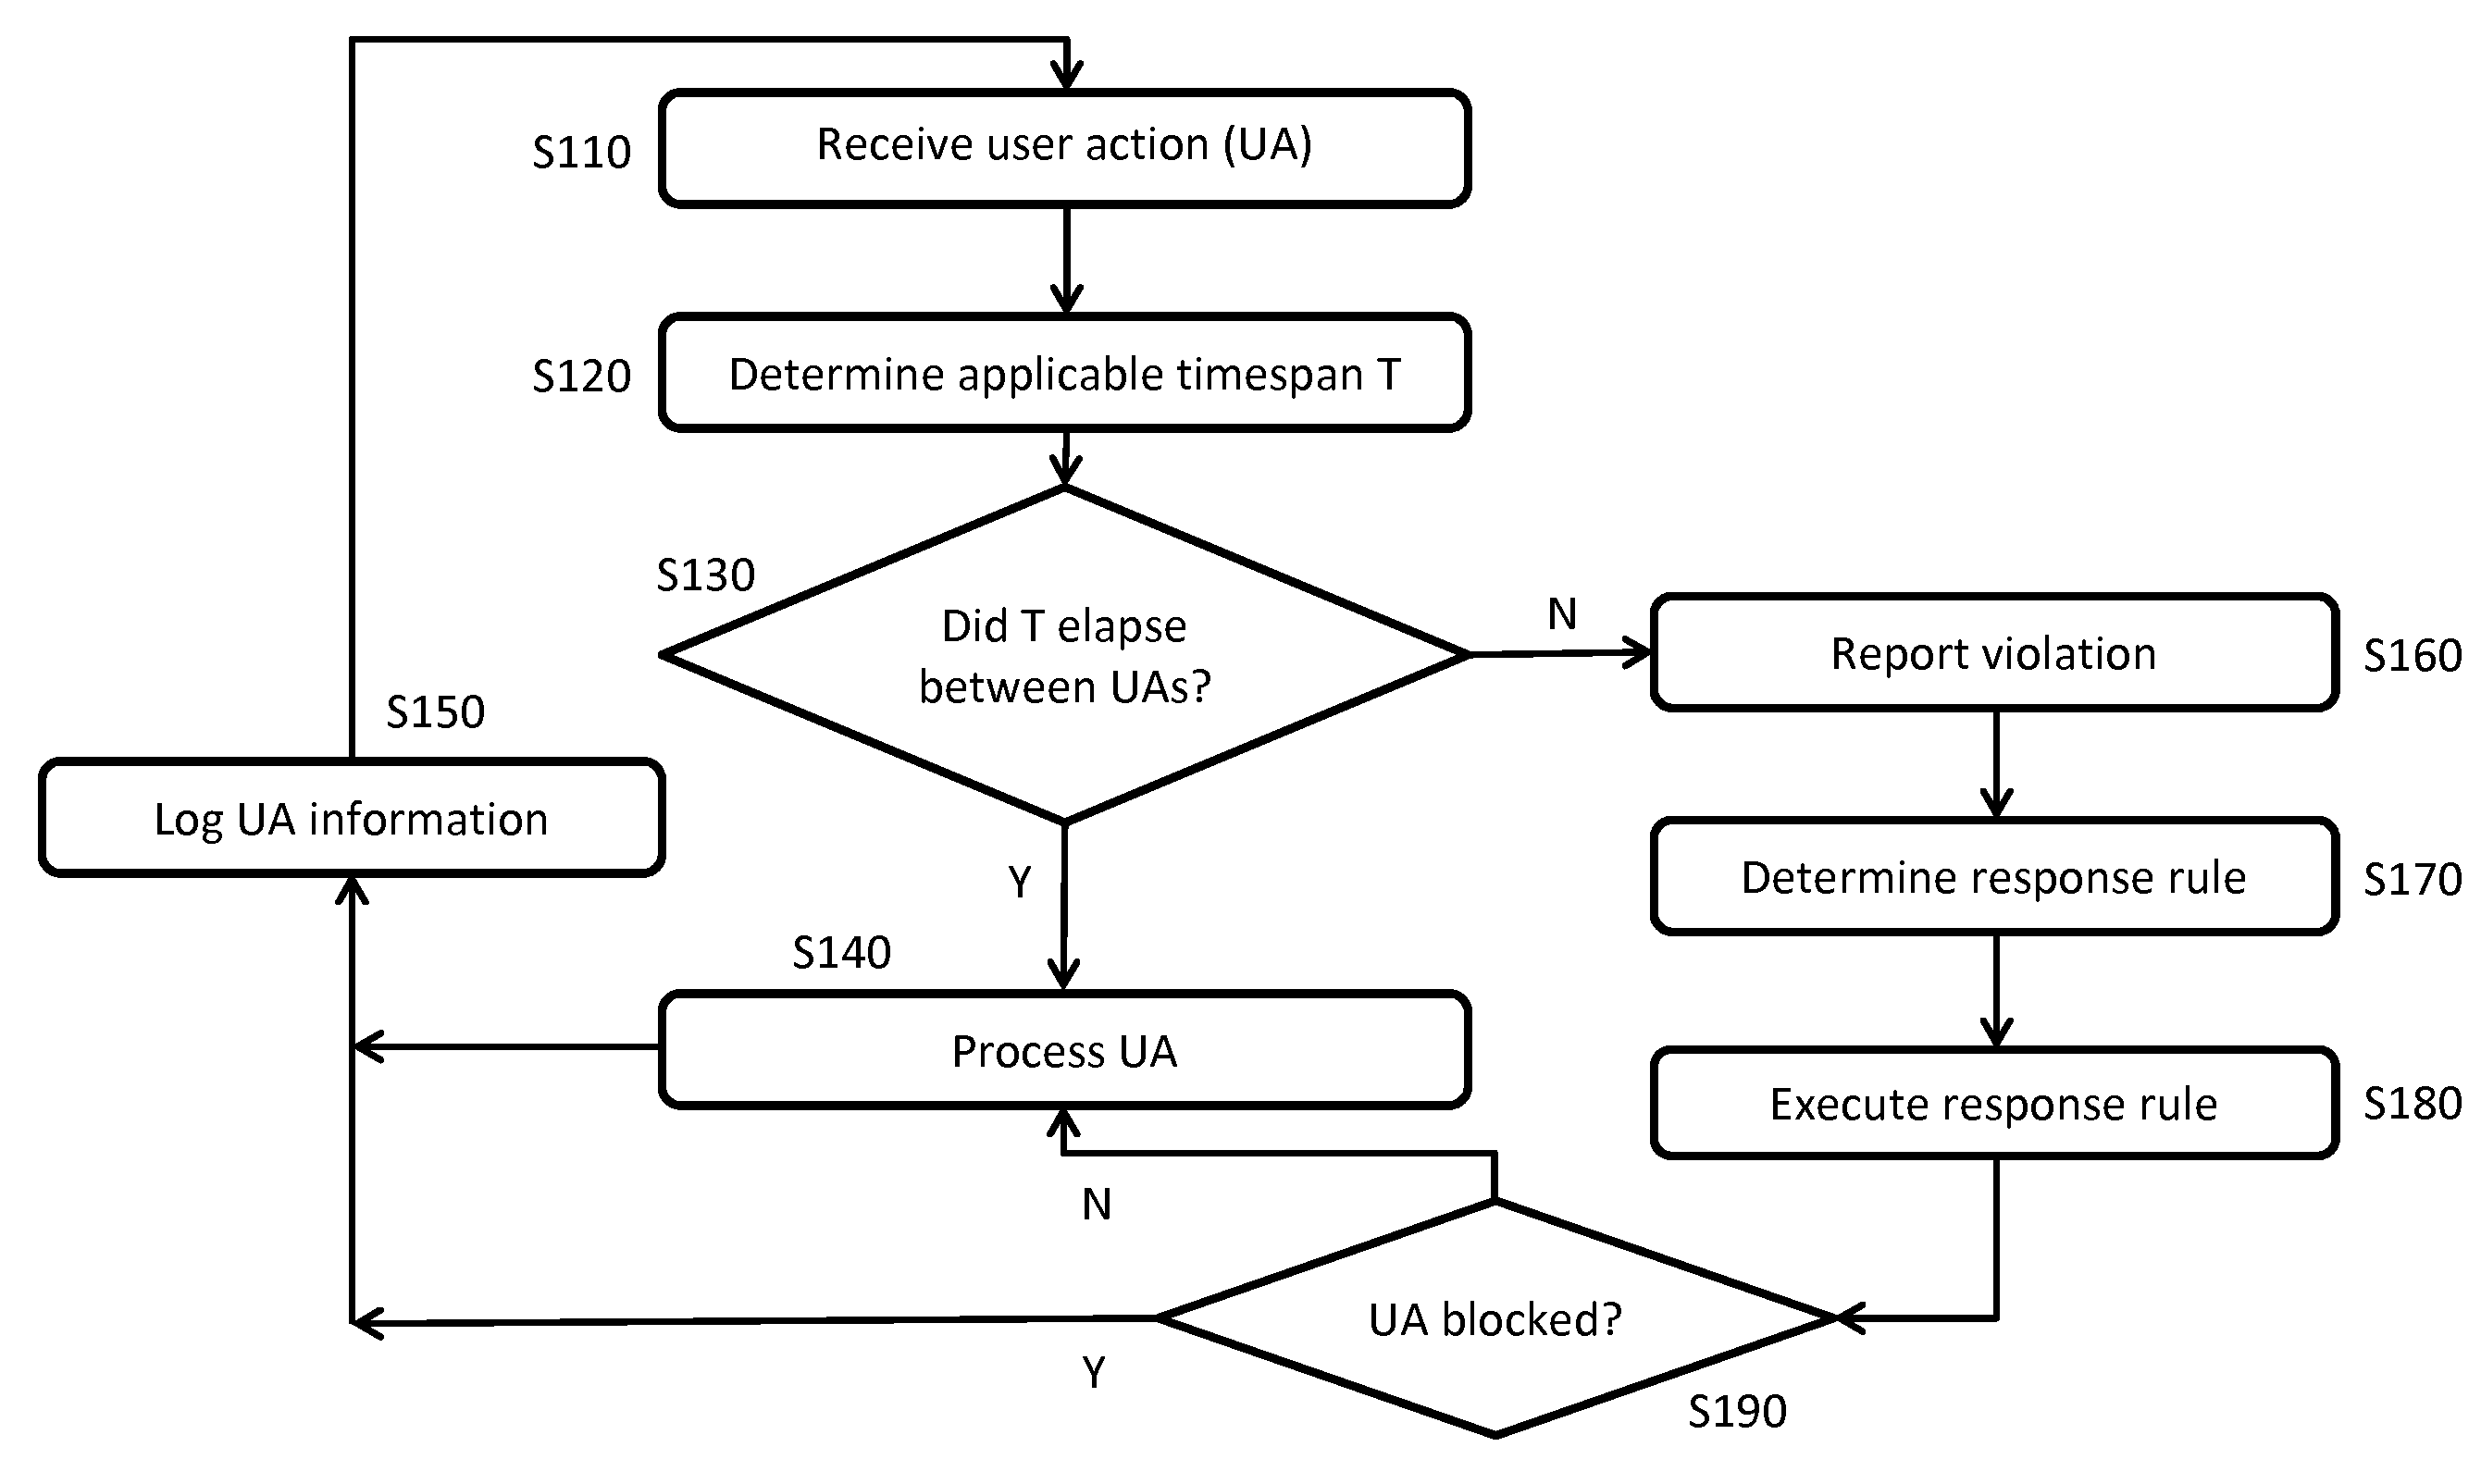 System and Method of Semi-Automated Velocity-Based Social Network Moderation